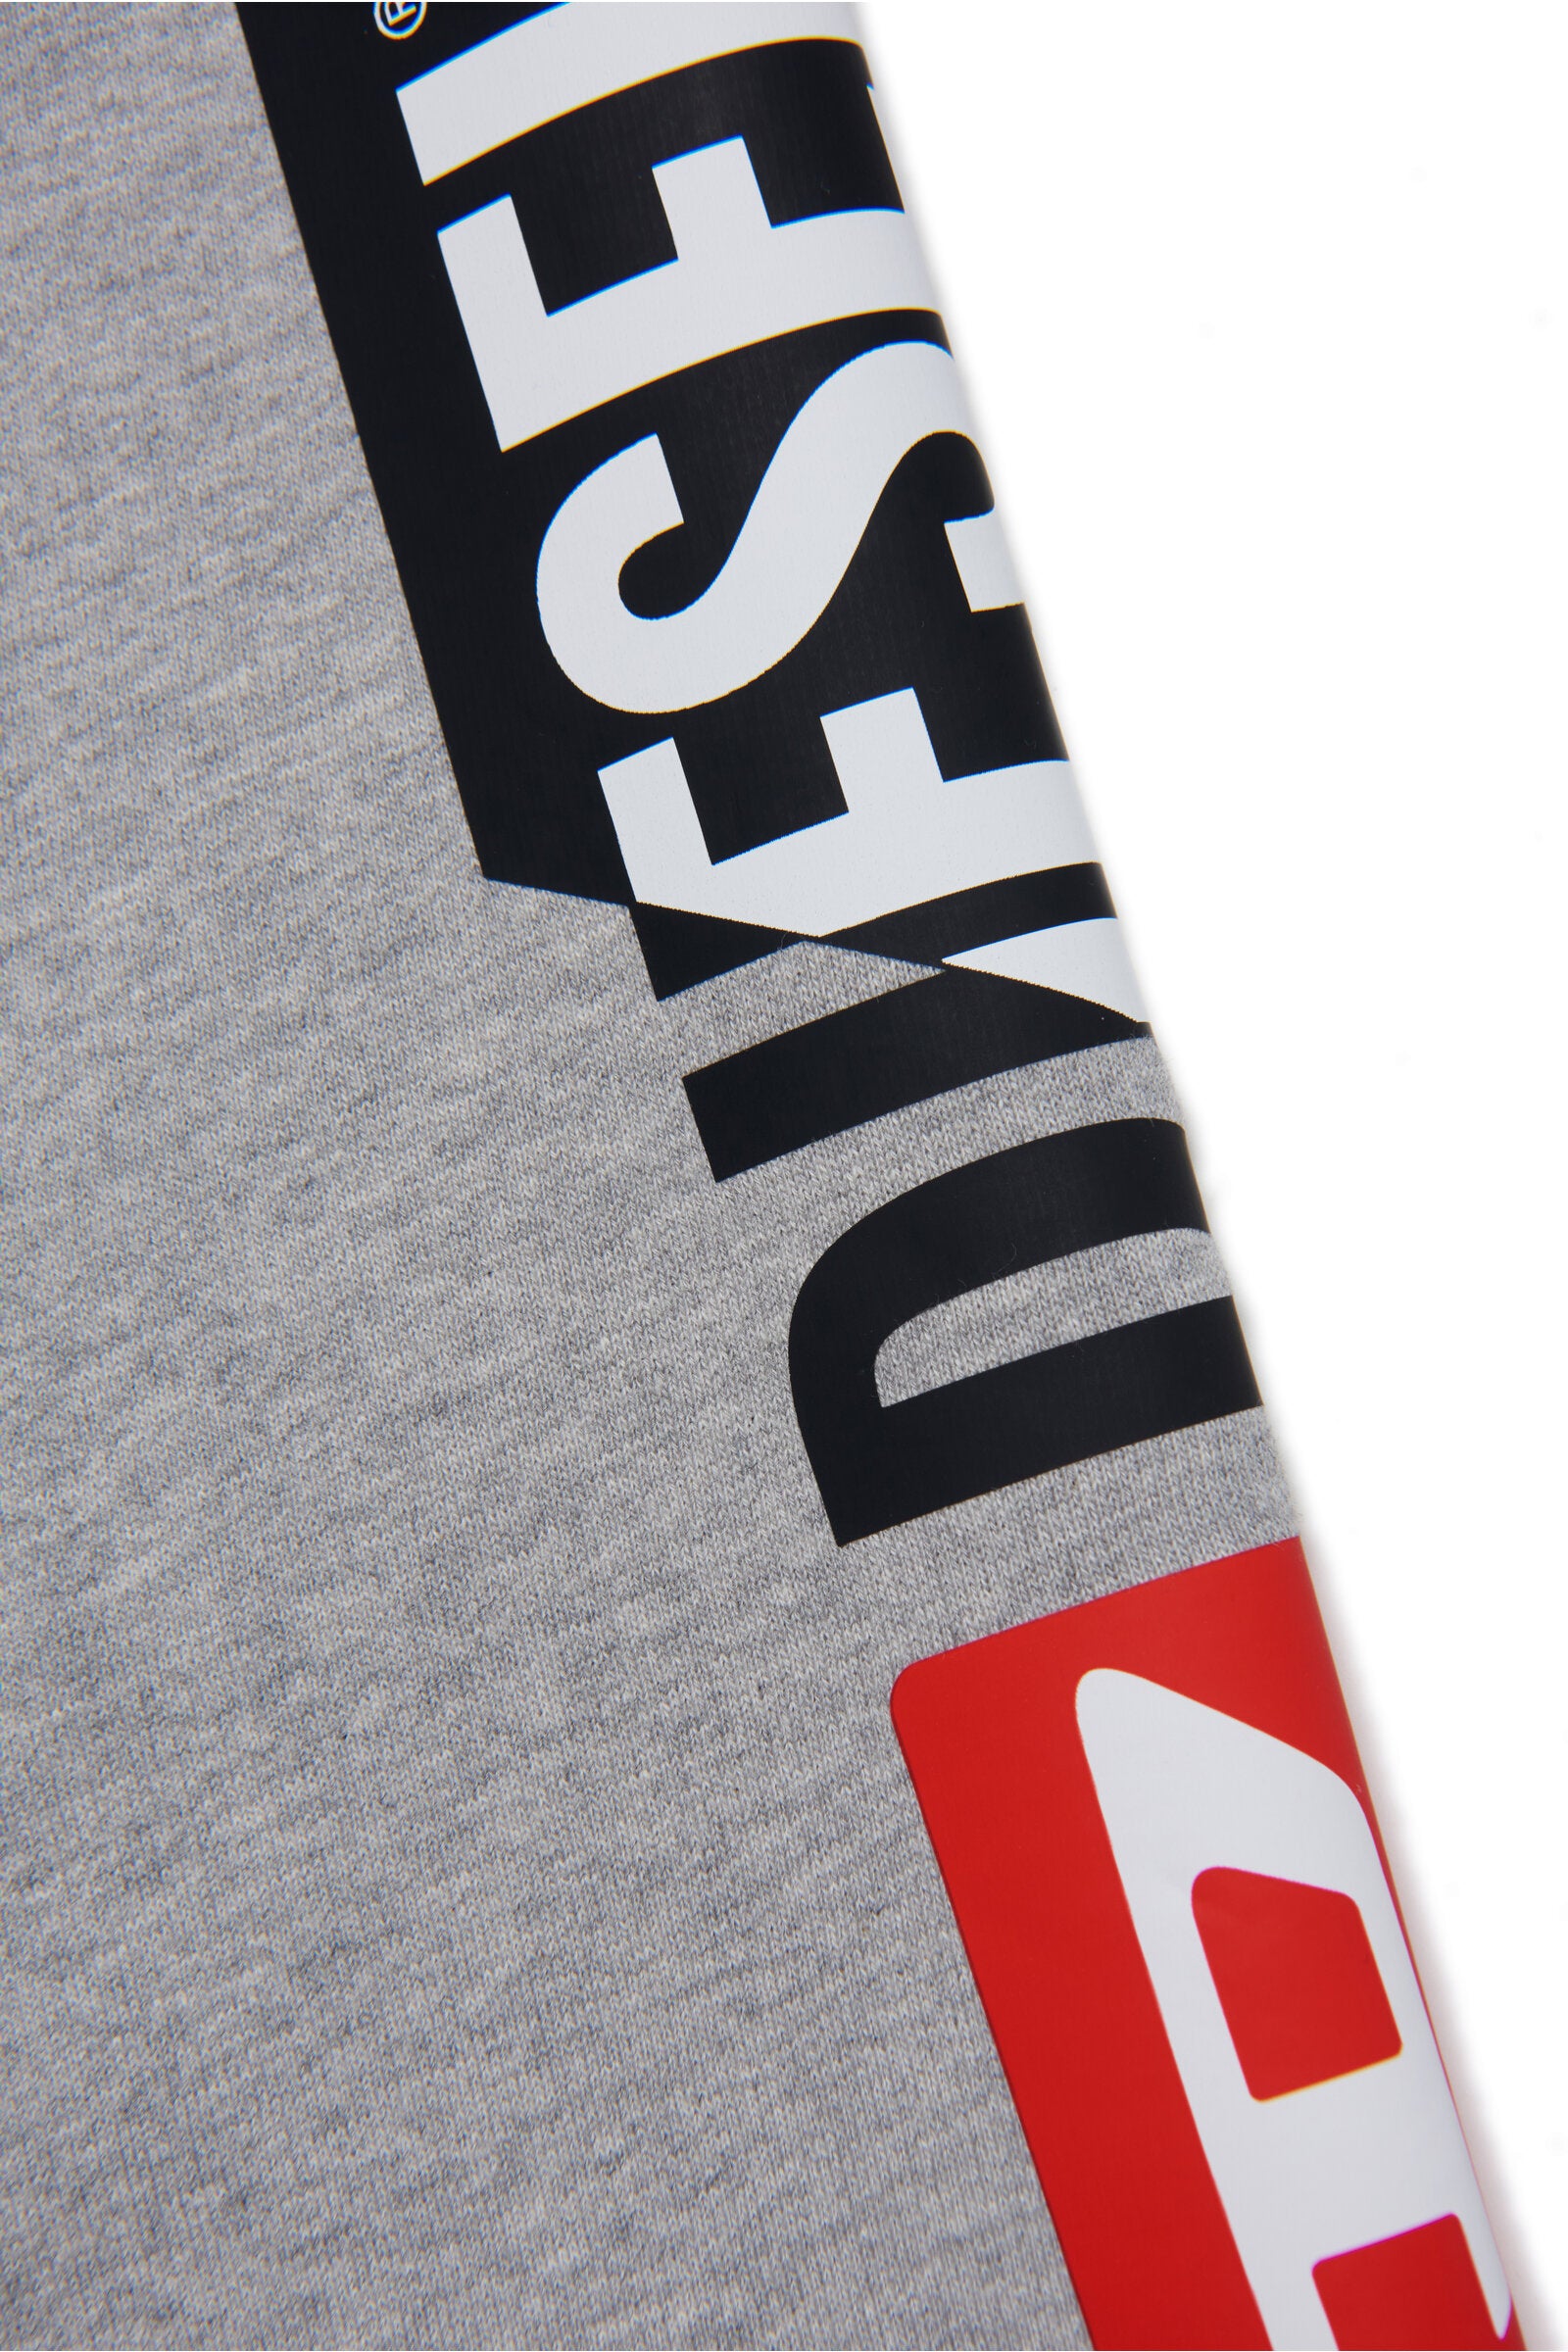 Gray jogger pants with Diesel double logo